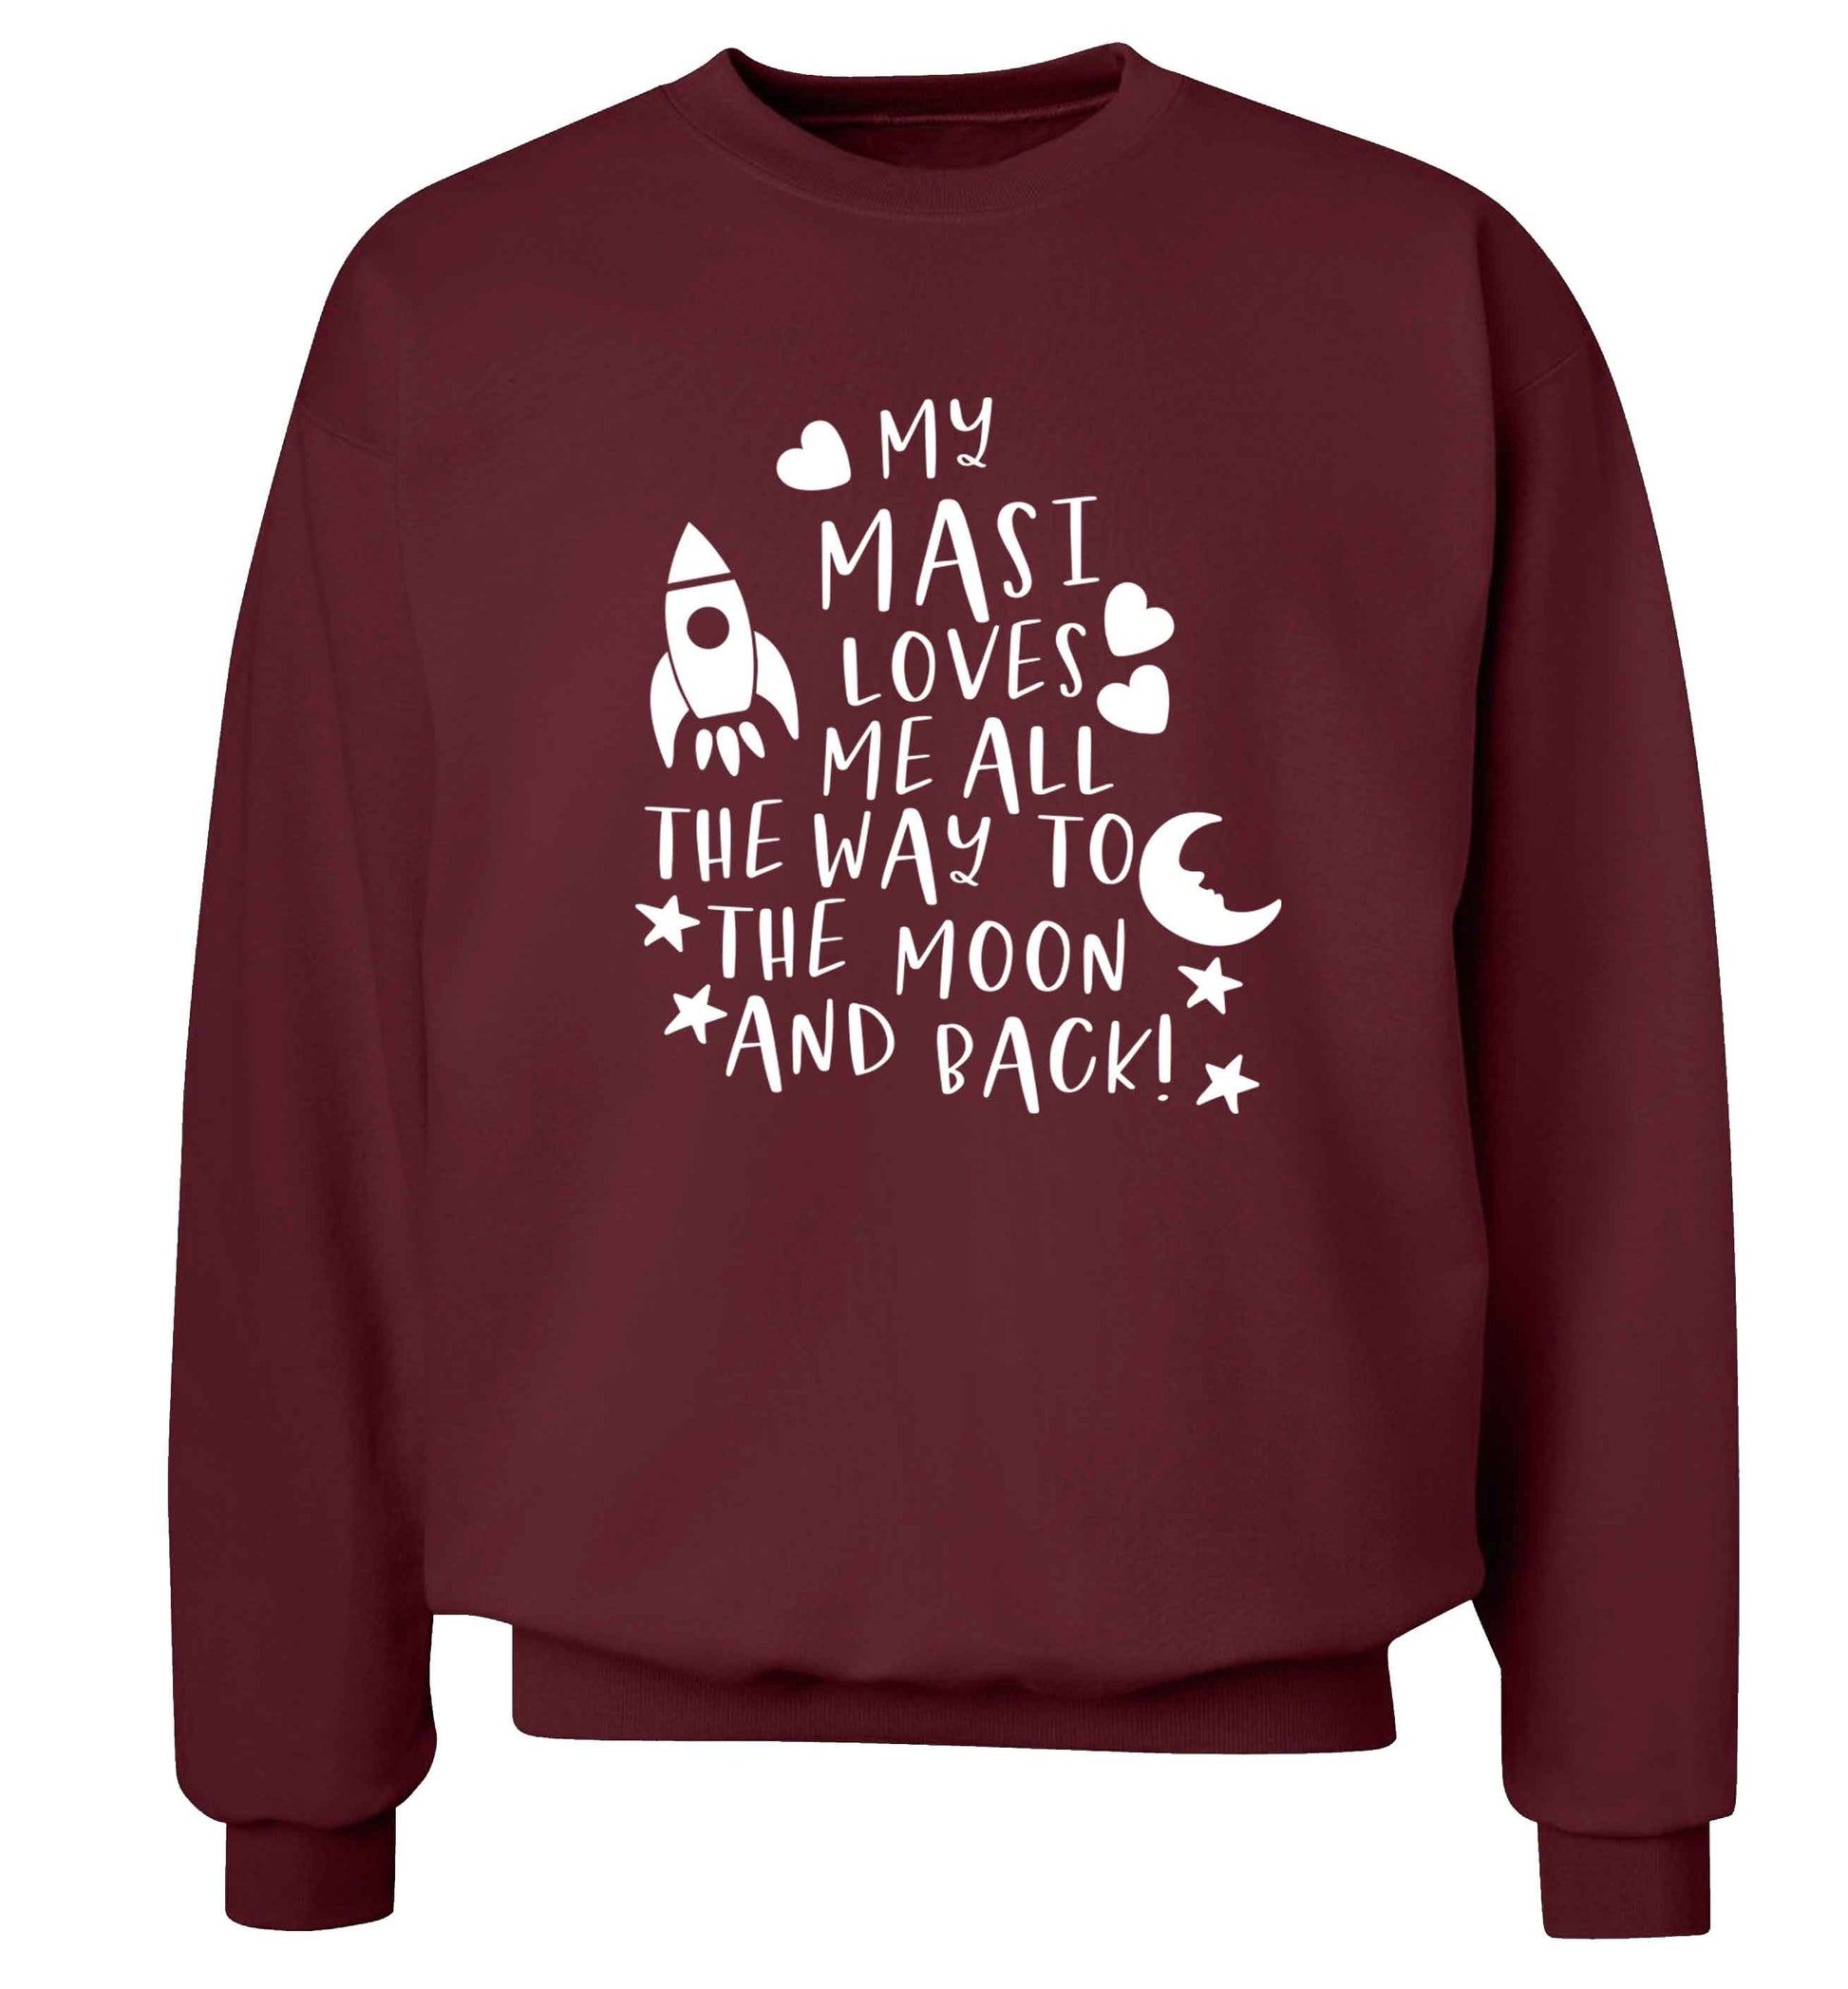 My masi loves me all the way to the moon and back Adult's unisex maroon Sweater 2XL